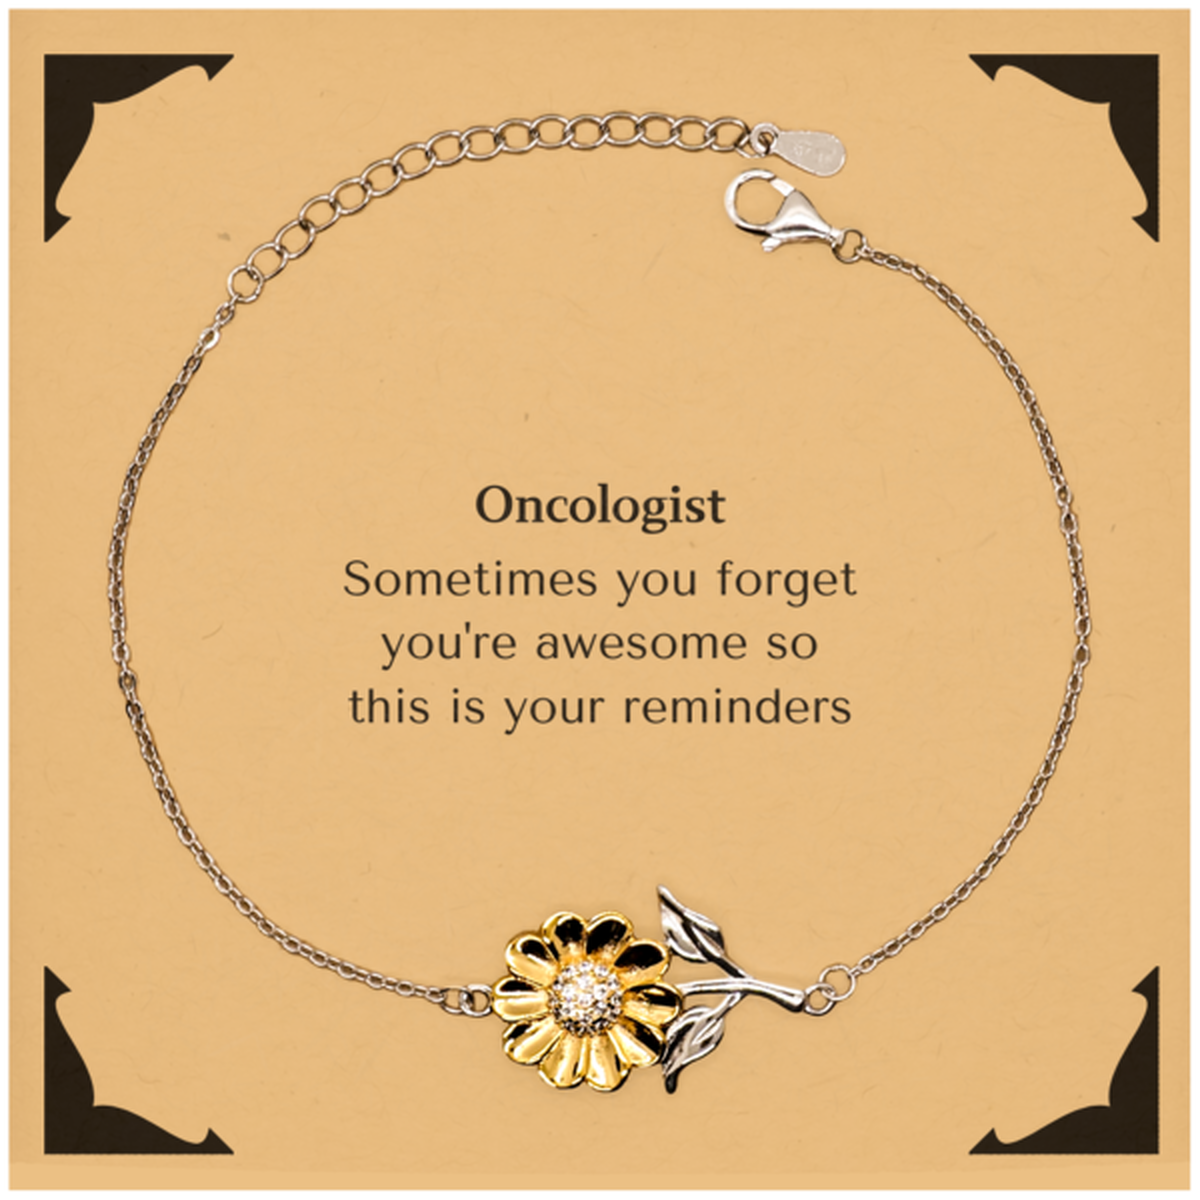 Sentimental Oncologist Sunflower Bracelet, Oncologist Sometimes you forget you're awesome so this is your reminders, Graduation Christmas Birthday Gifts for Oncologist, Men, Women, Coworkers